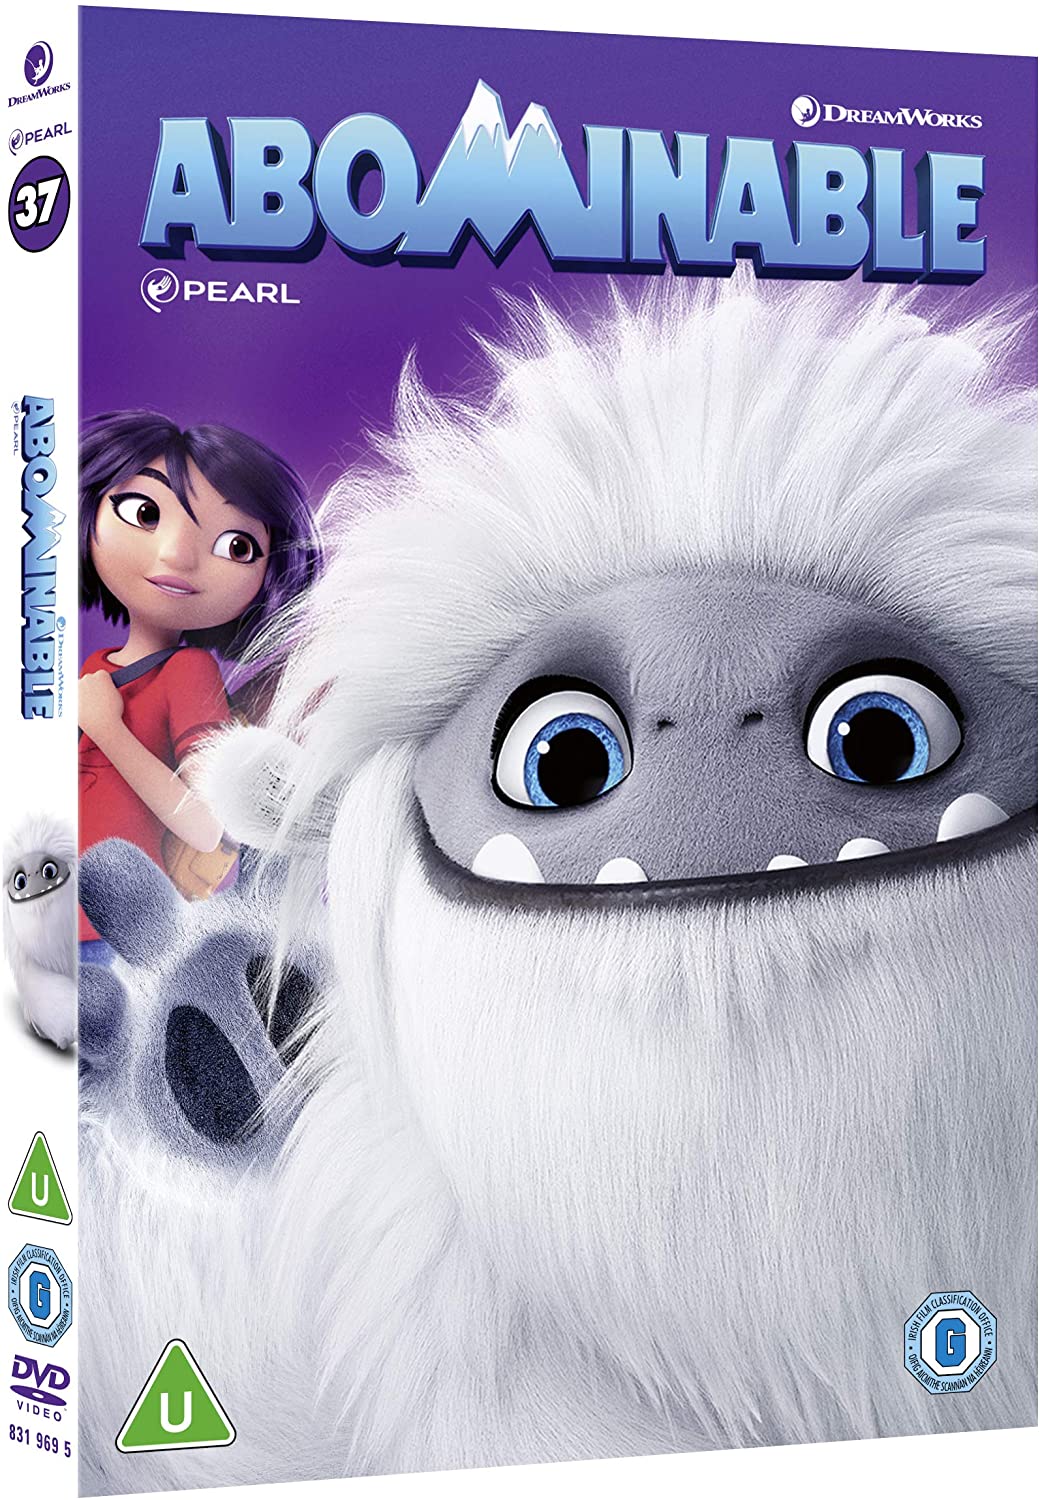 Abominable [2019] (Dreamworks) (DVD)